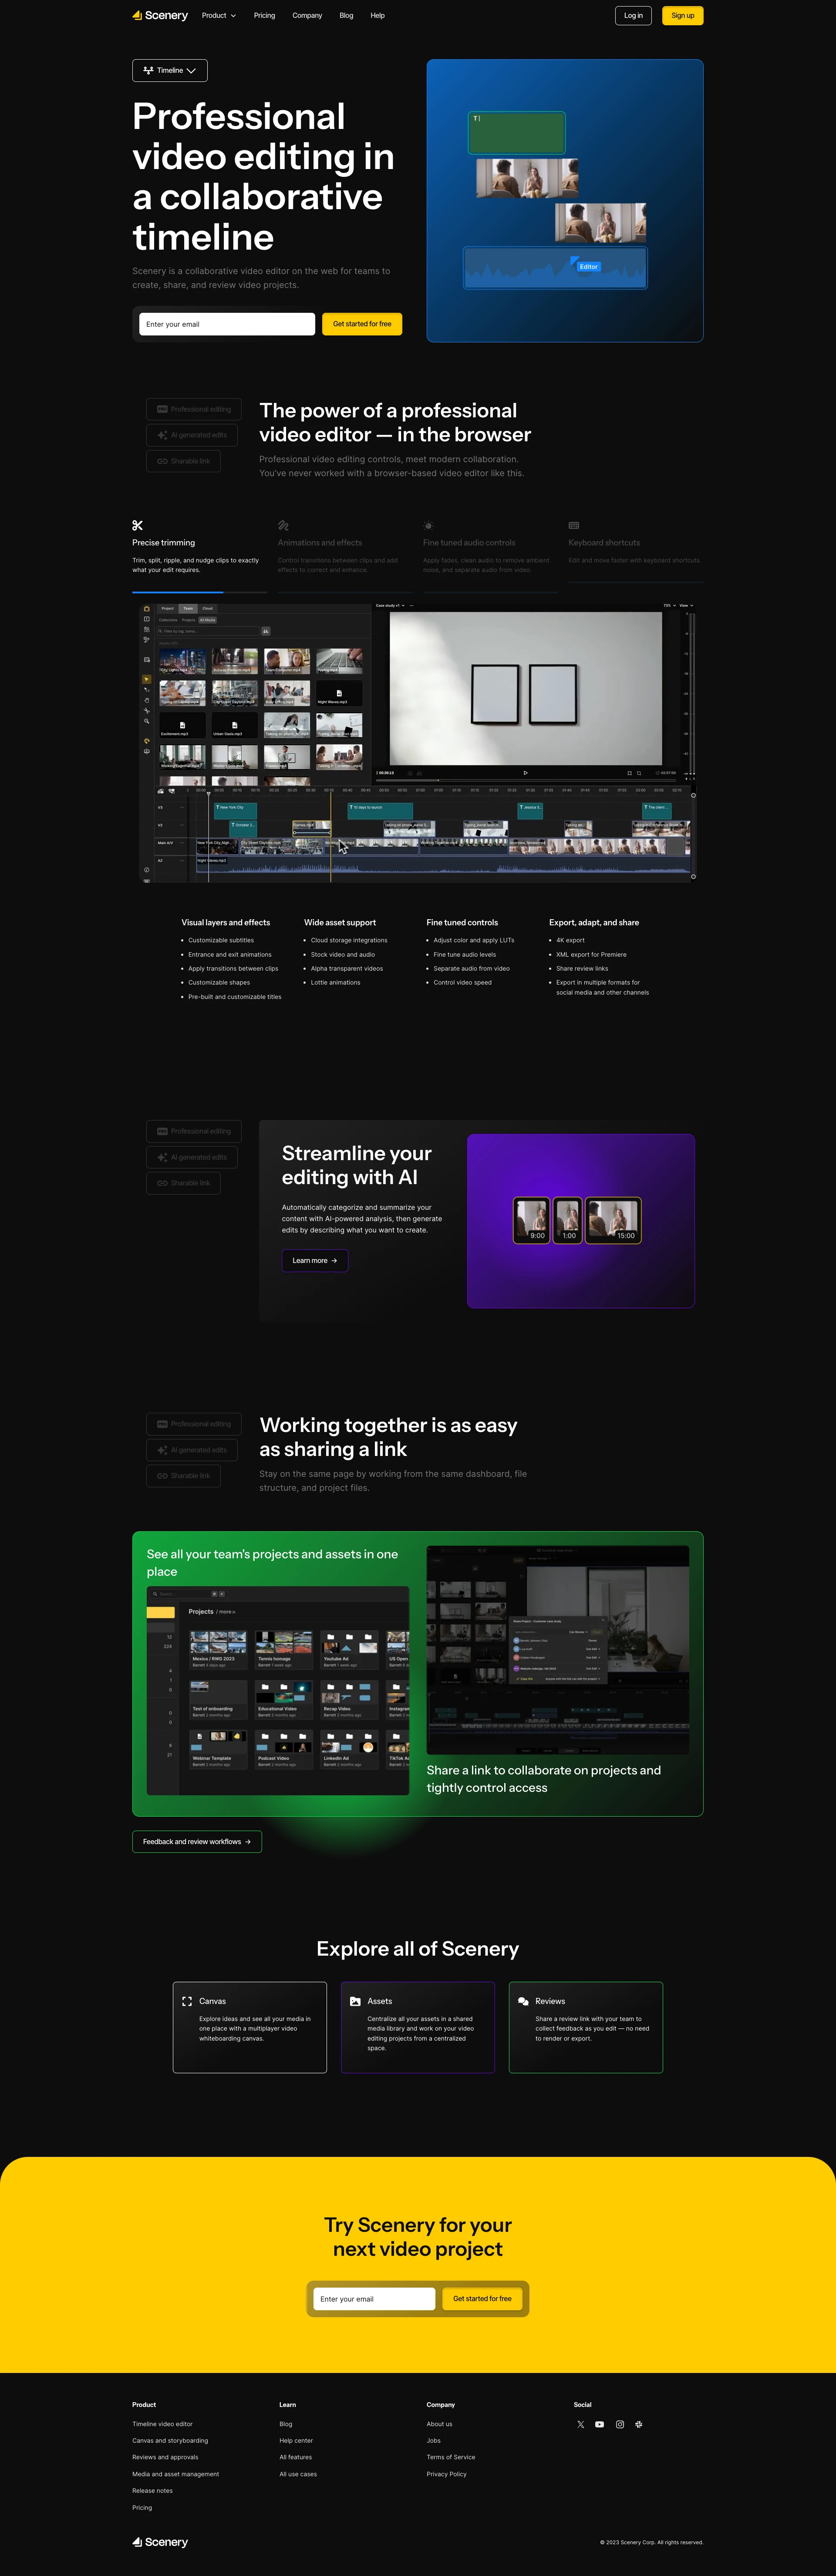 Scenery Landing Page Example: Video editing for the way your team works. Scenery is a collaborative video editing workspace for asset management, editing, and review — with AI assisted workflows.